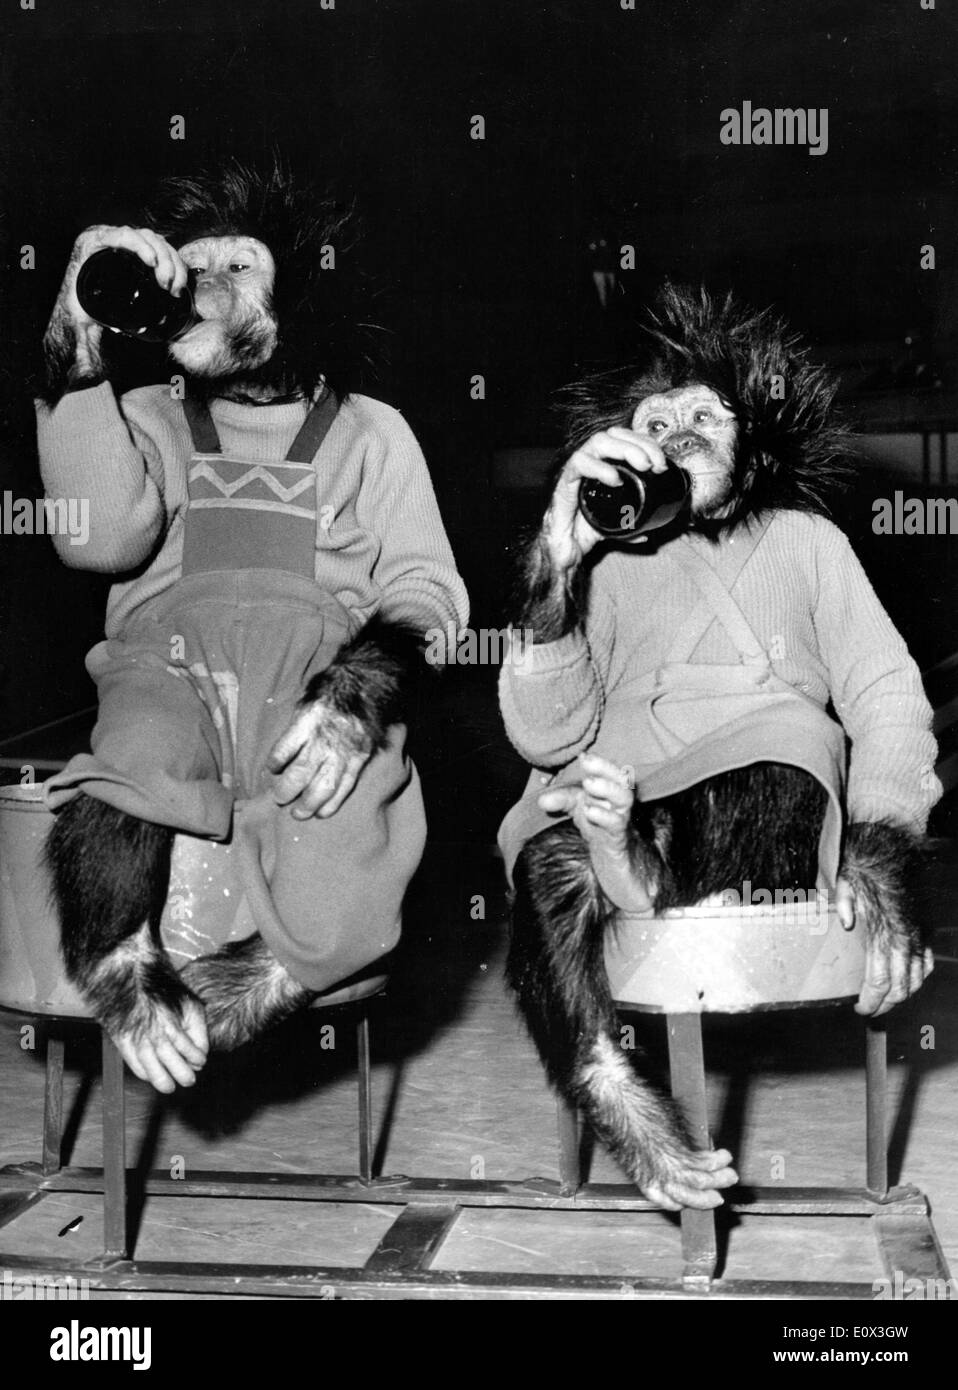 Chimpanzees Polo and Coco of Circus Knie Stock Photo